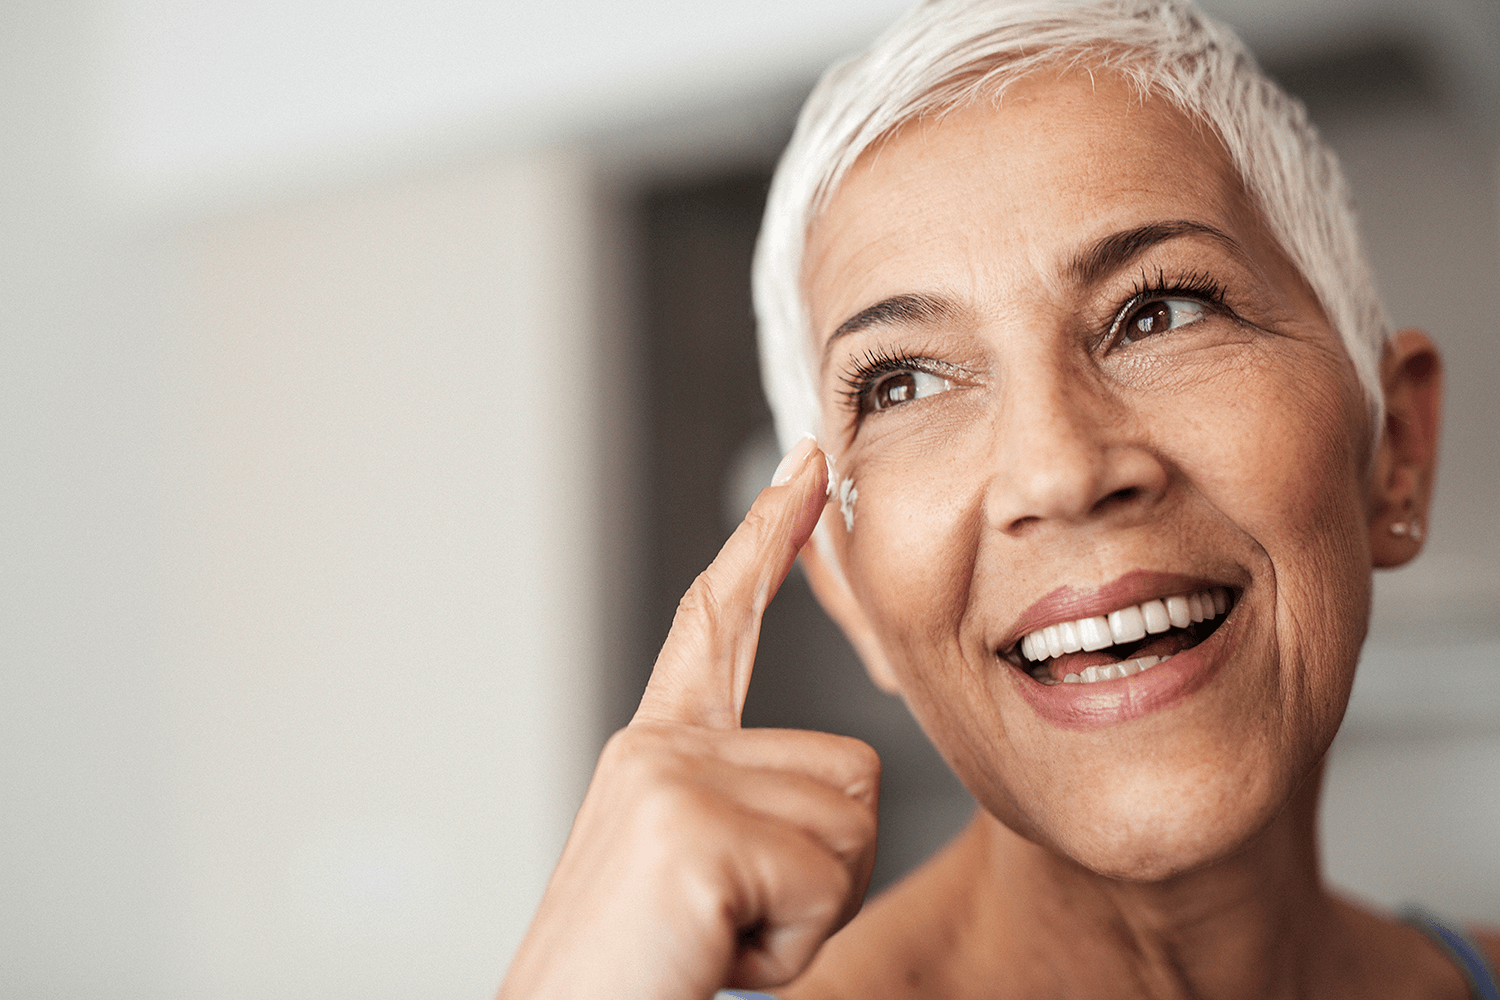 MENOPAUSE SKINCARE: NAVIGATING THE IMPACT OF HORMONAL CHANGES ON YOUR SKIN